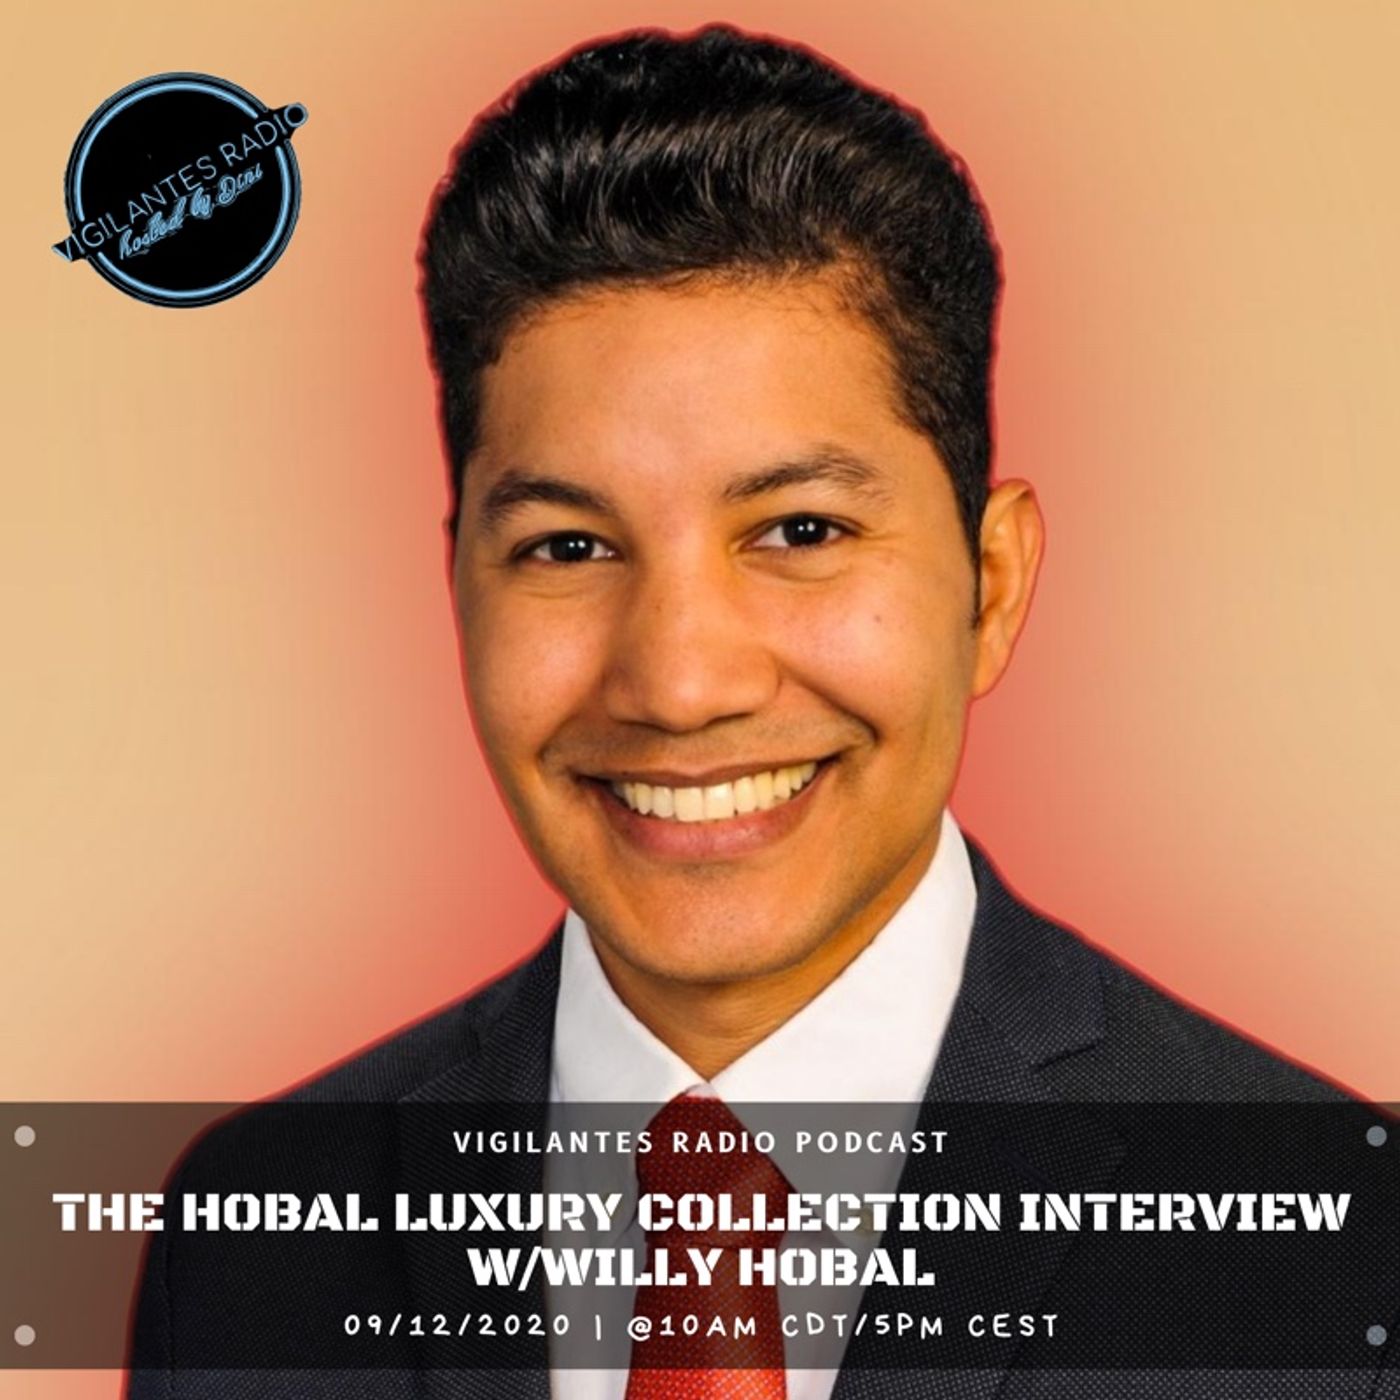 The Hobal Luxury Collection Interview w/Willy Hobal. Image